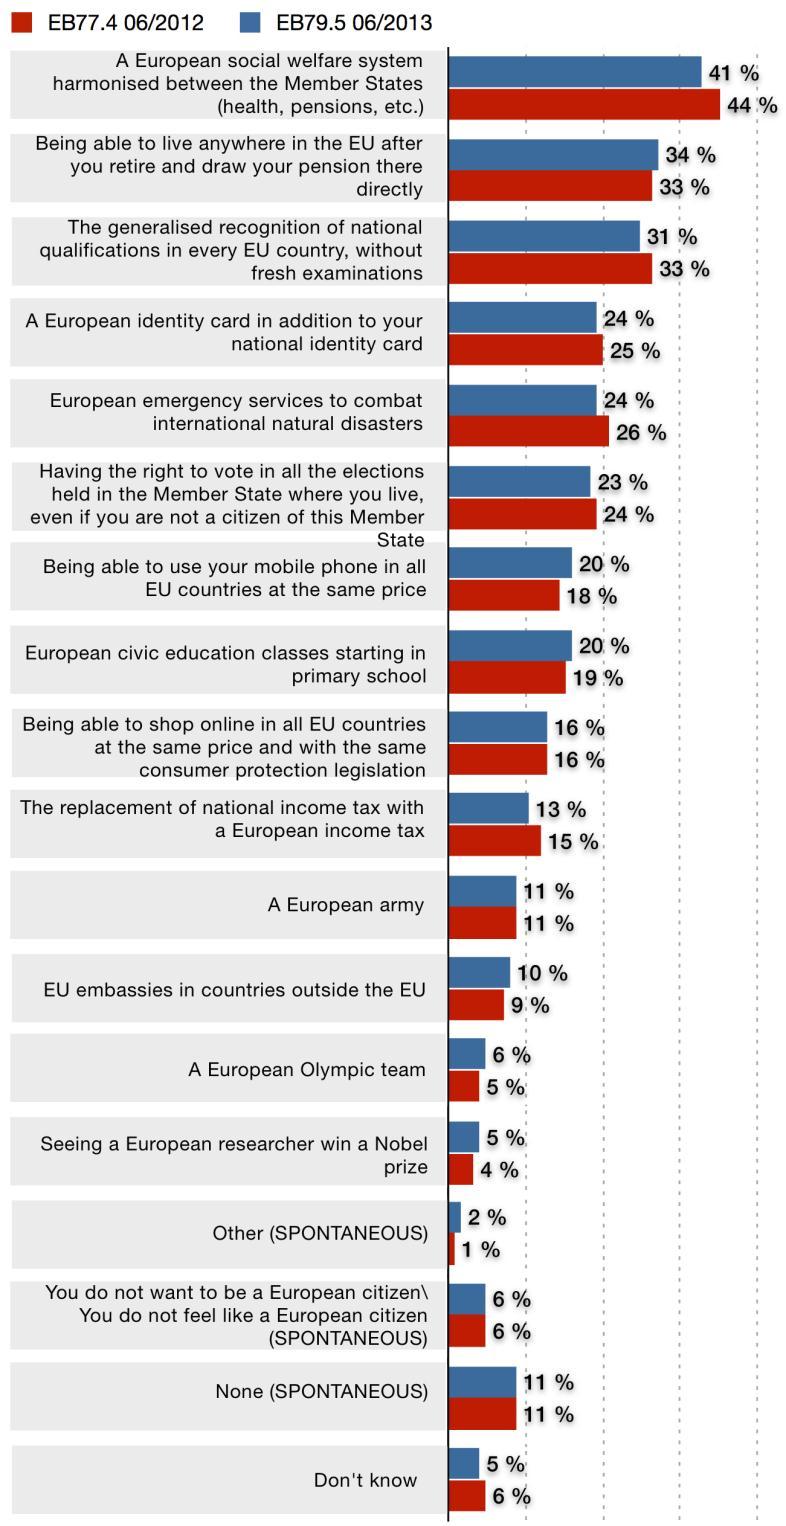 EU CITIZENSHIP Which of the following things would do most to strengthen your feeling of being a European citizen? Does more harmonisation lead to a stronger feeling of EU citizenship?